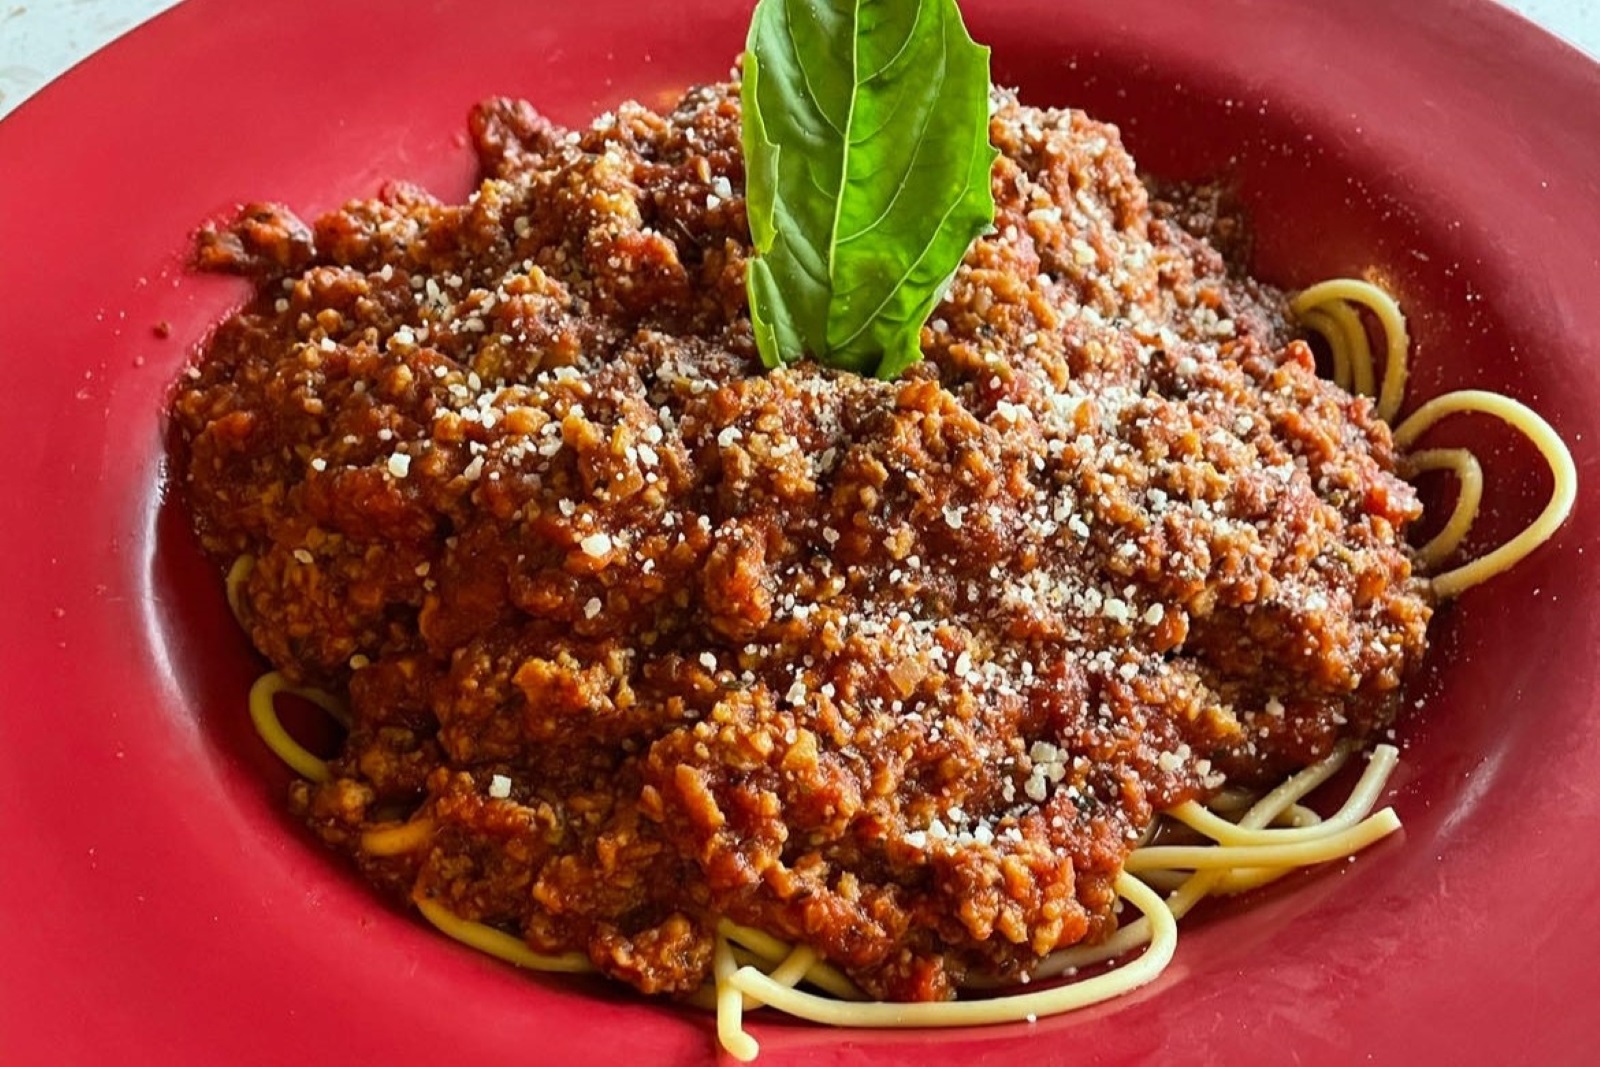 A spaghetti dish from Piccolo, featuring Jake's Vegan crumbles, on a red plate.